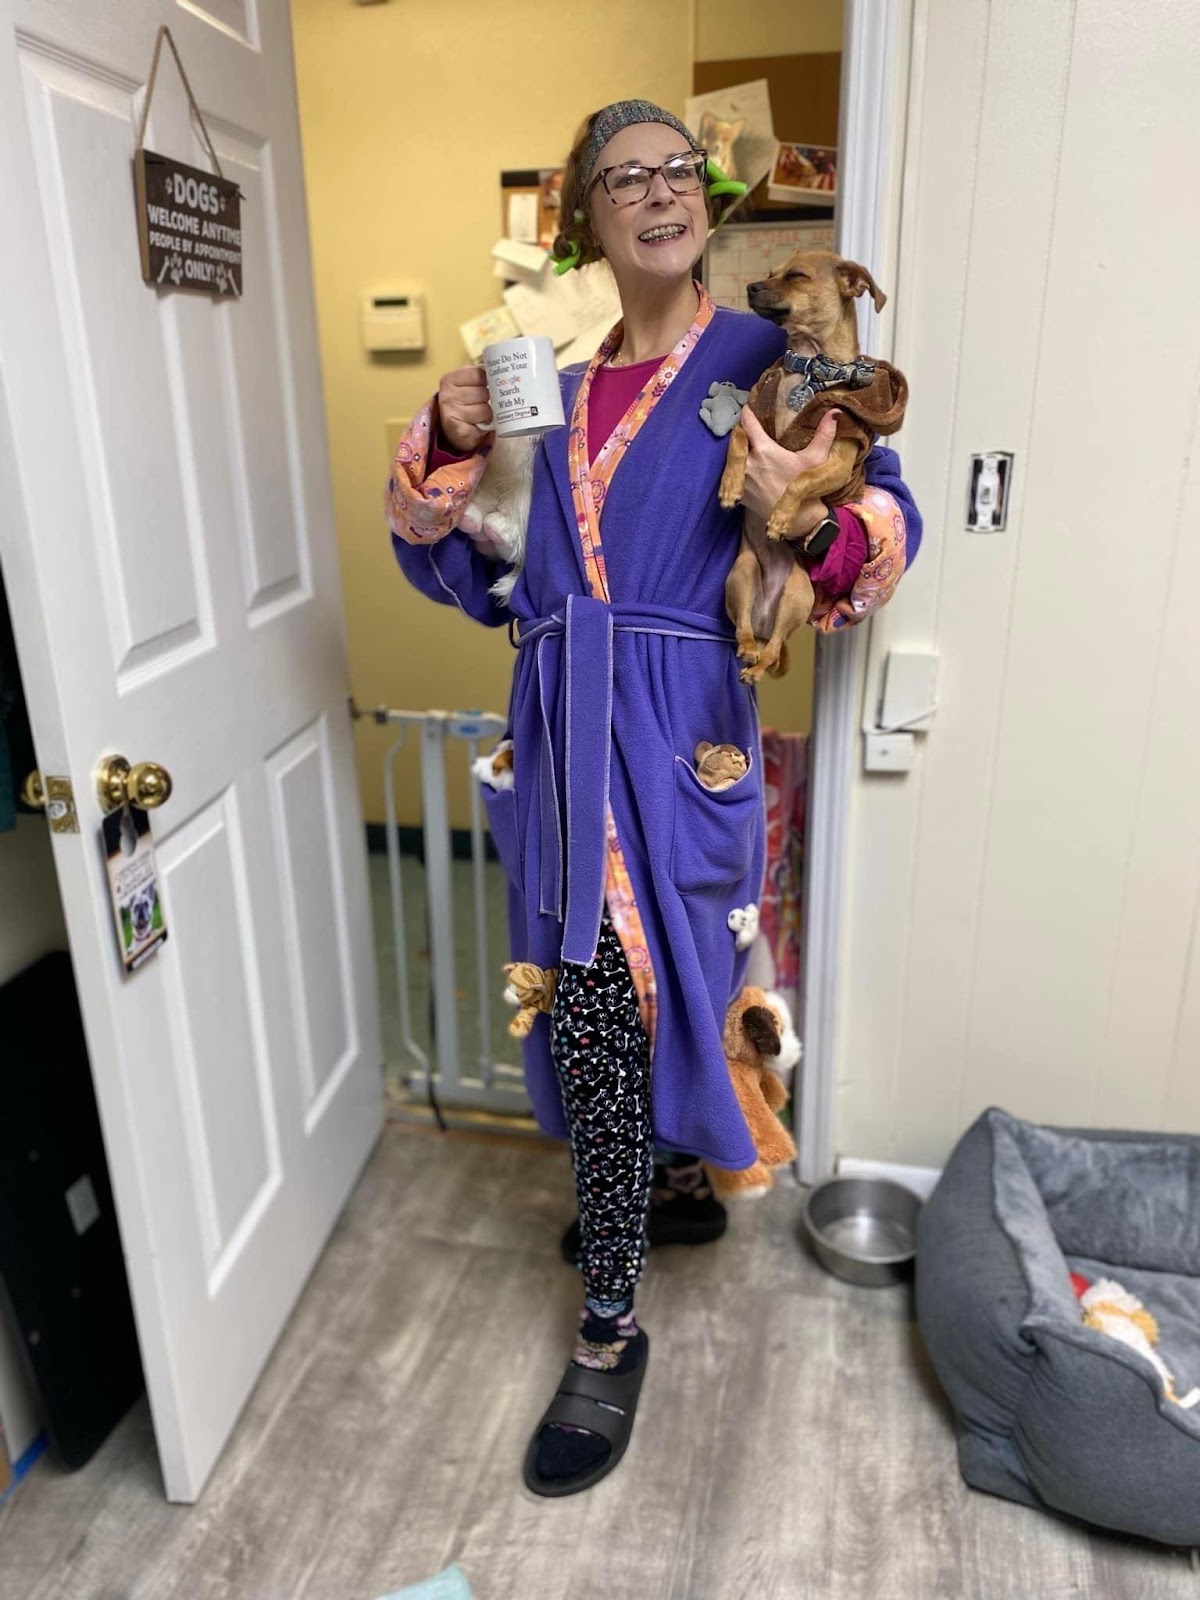 A woman in a purple robe holding stuffed animals.